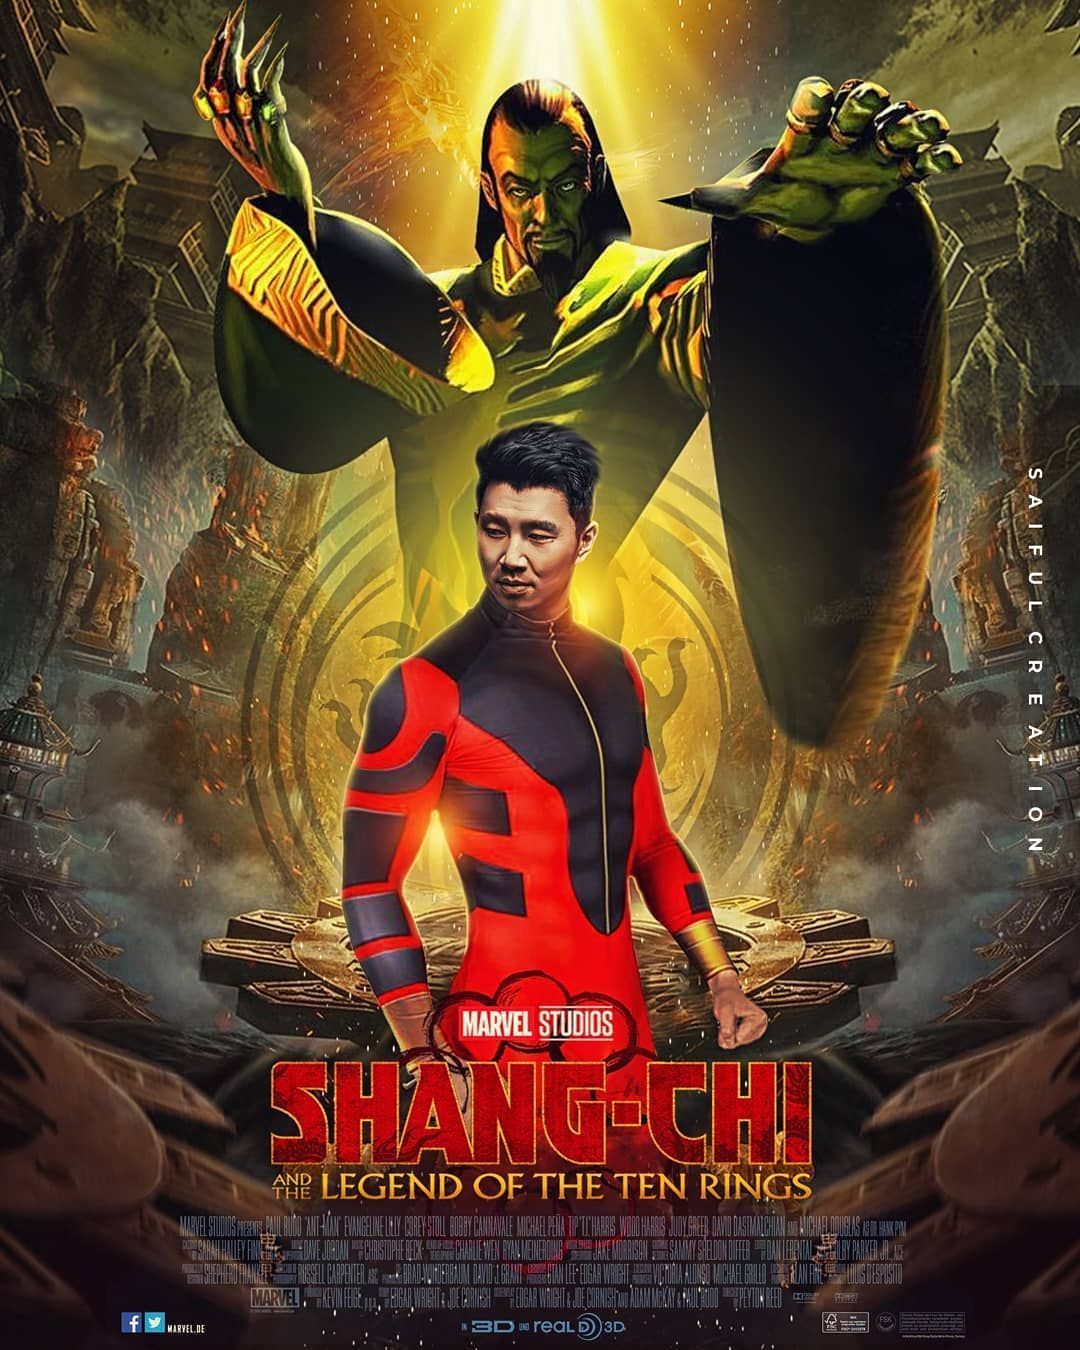 Shang Chi And The Legend Of The Ten Rings Wallpaper Free Shang Chi And The Legend Of The Ten Rings Background